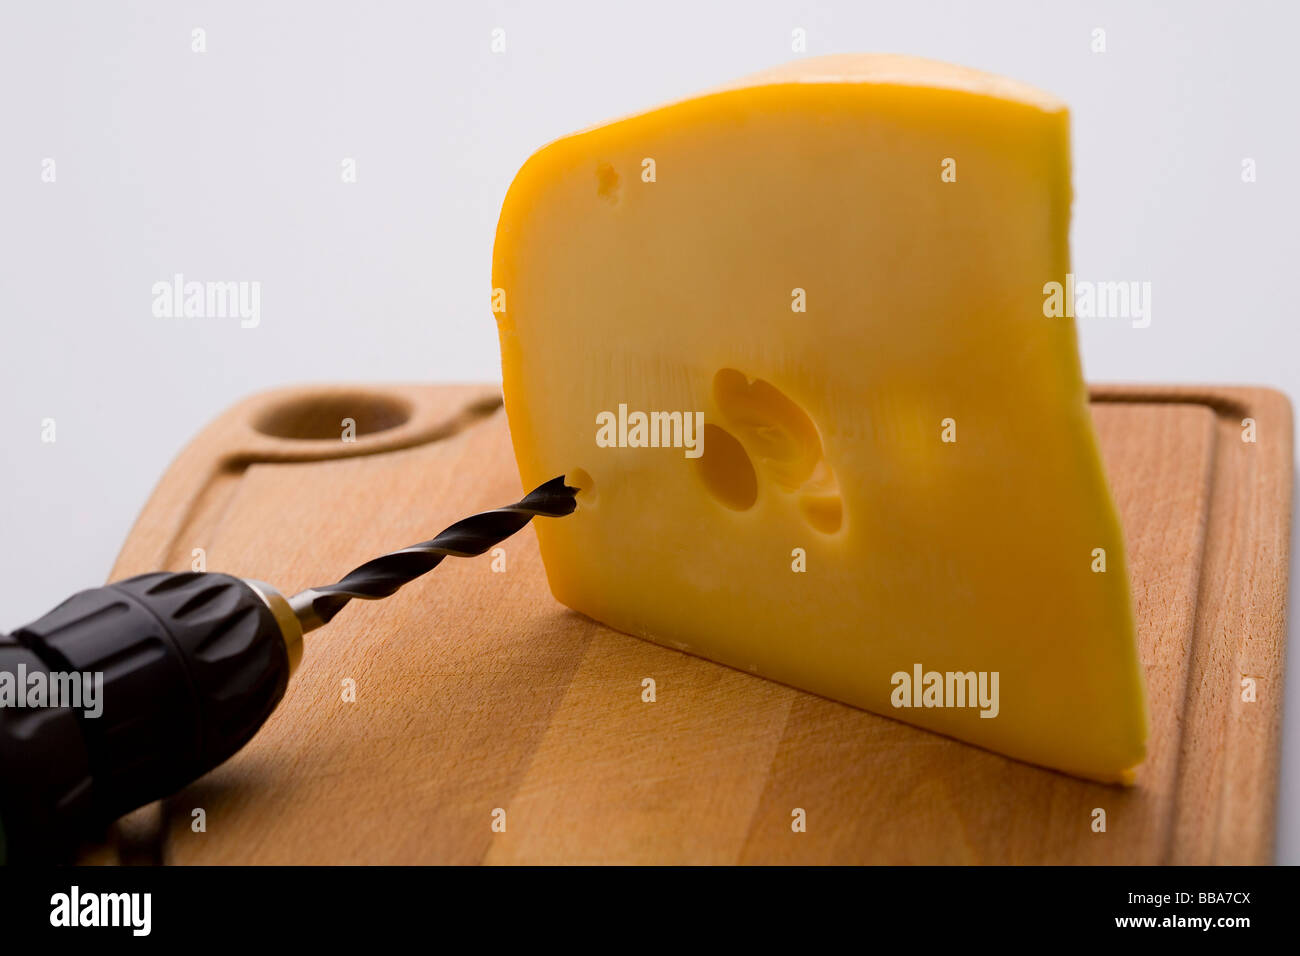 Drilling holes into cheese Stock Photo